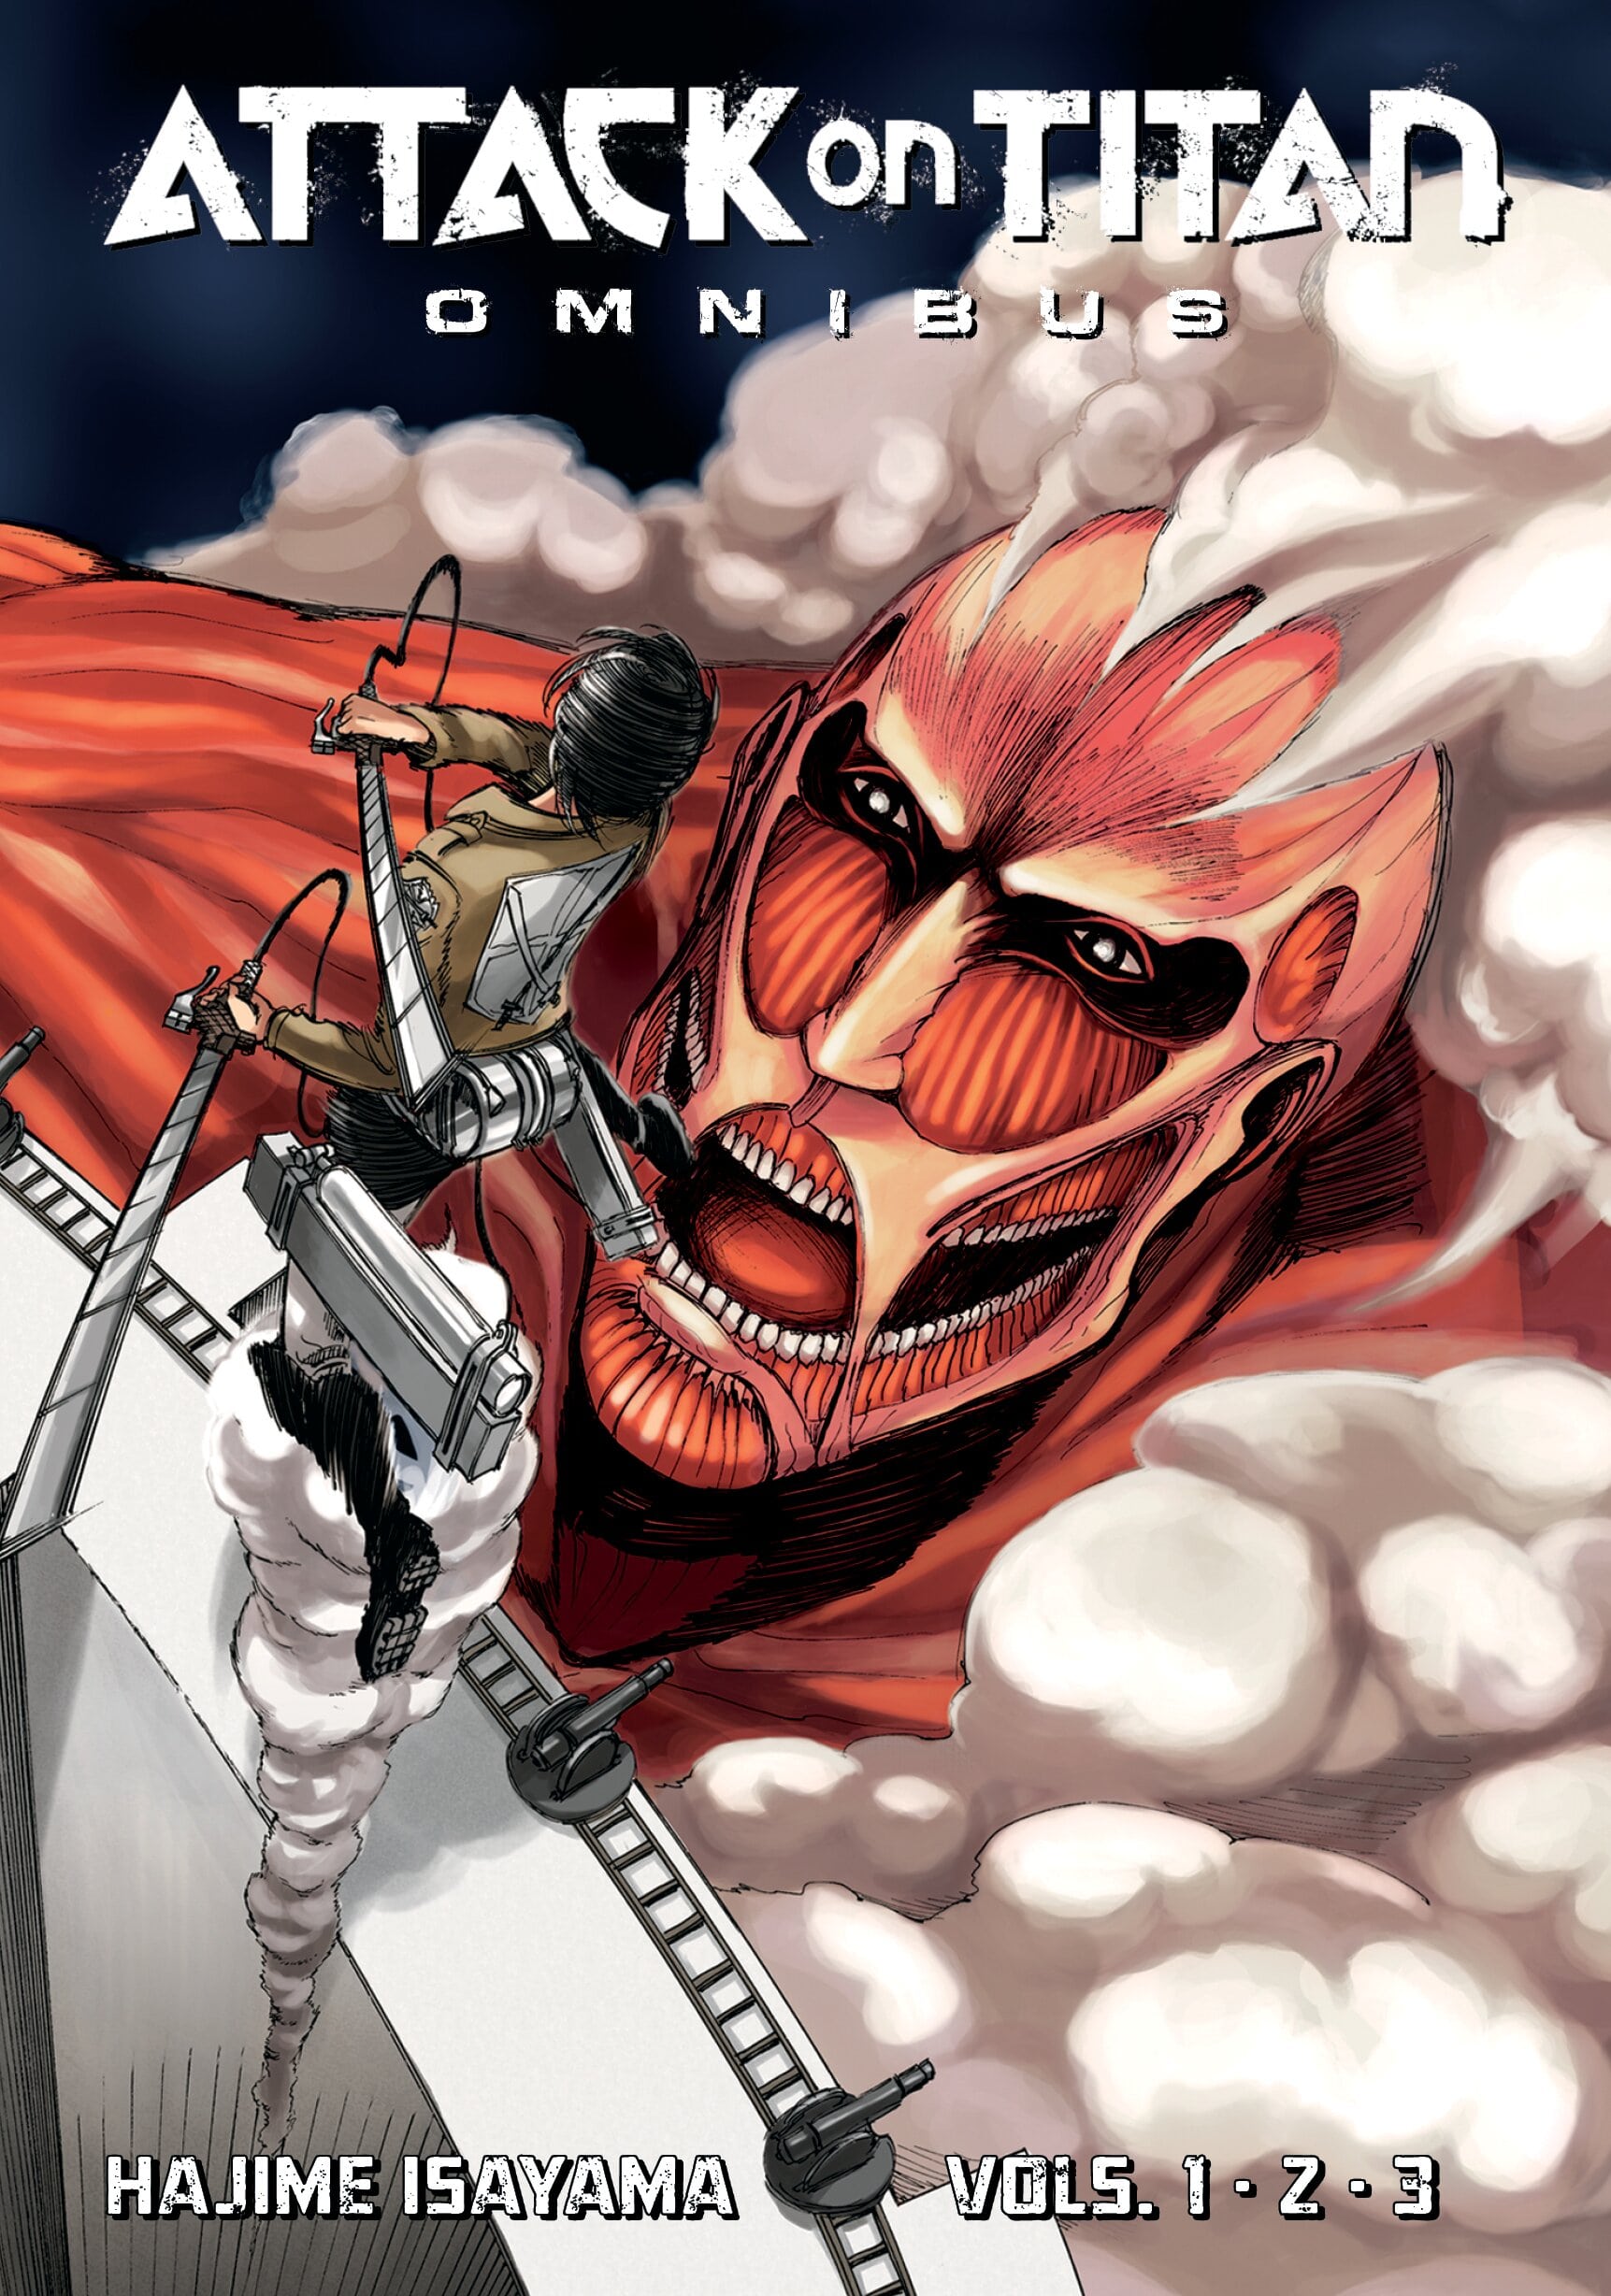 Attack on Titan Gathers Mikasa's Gang in New Promo Art